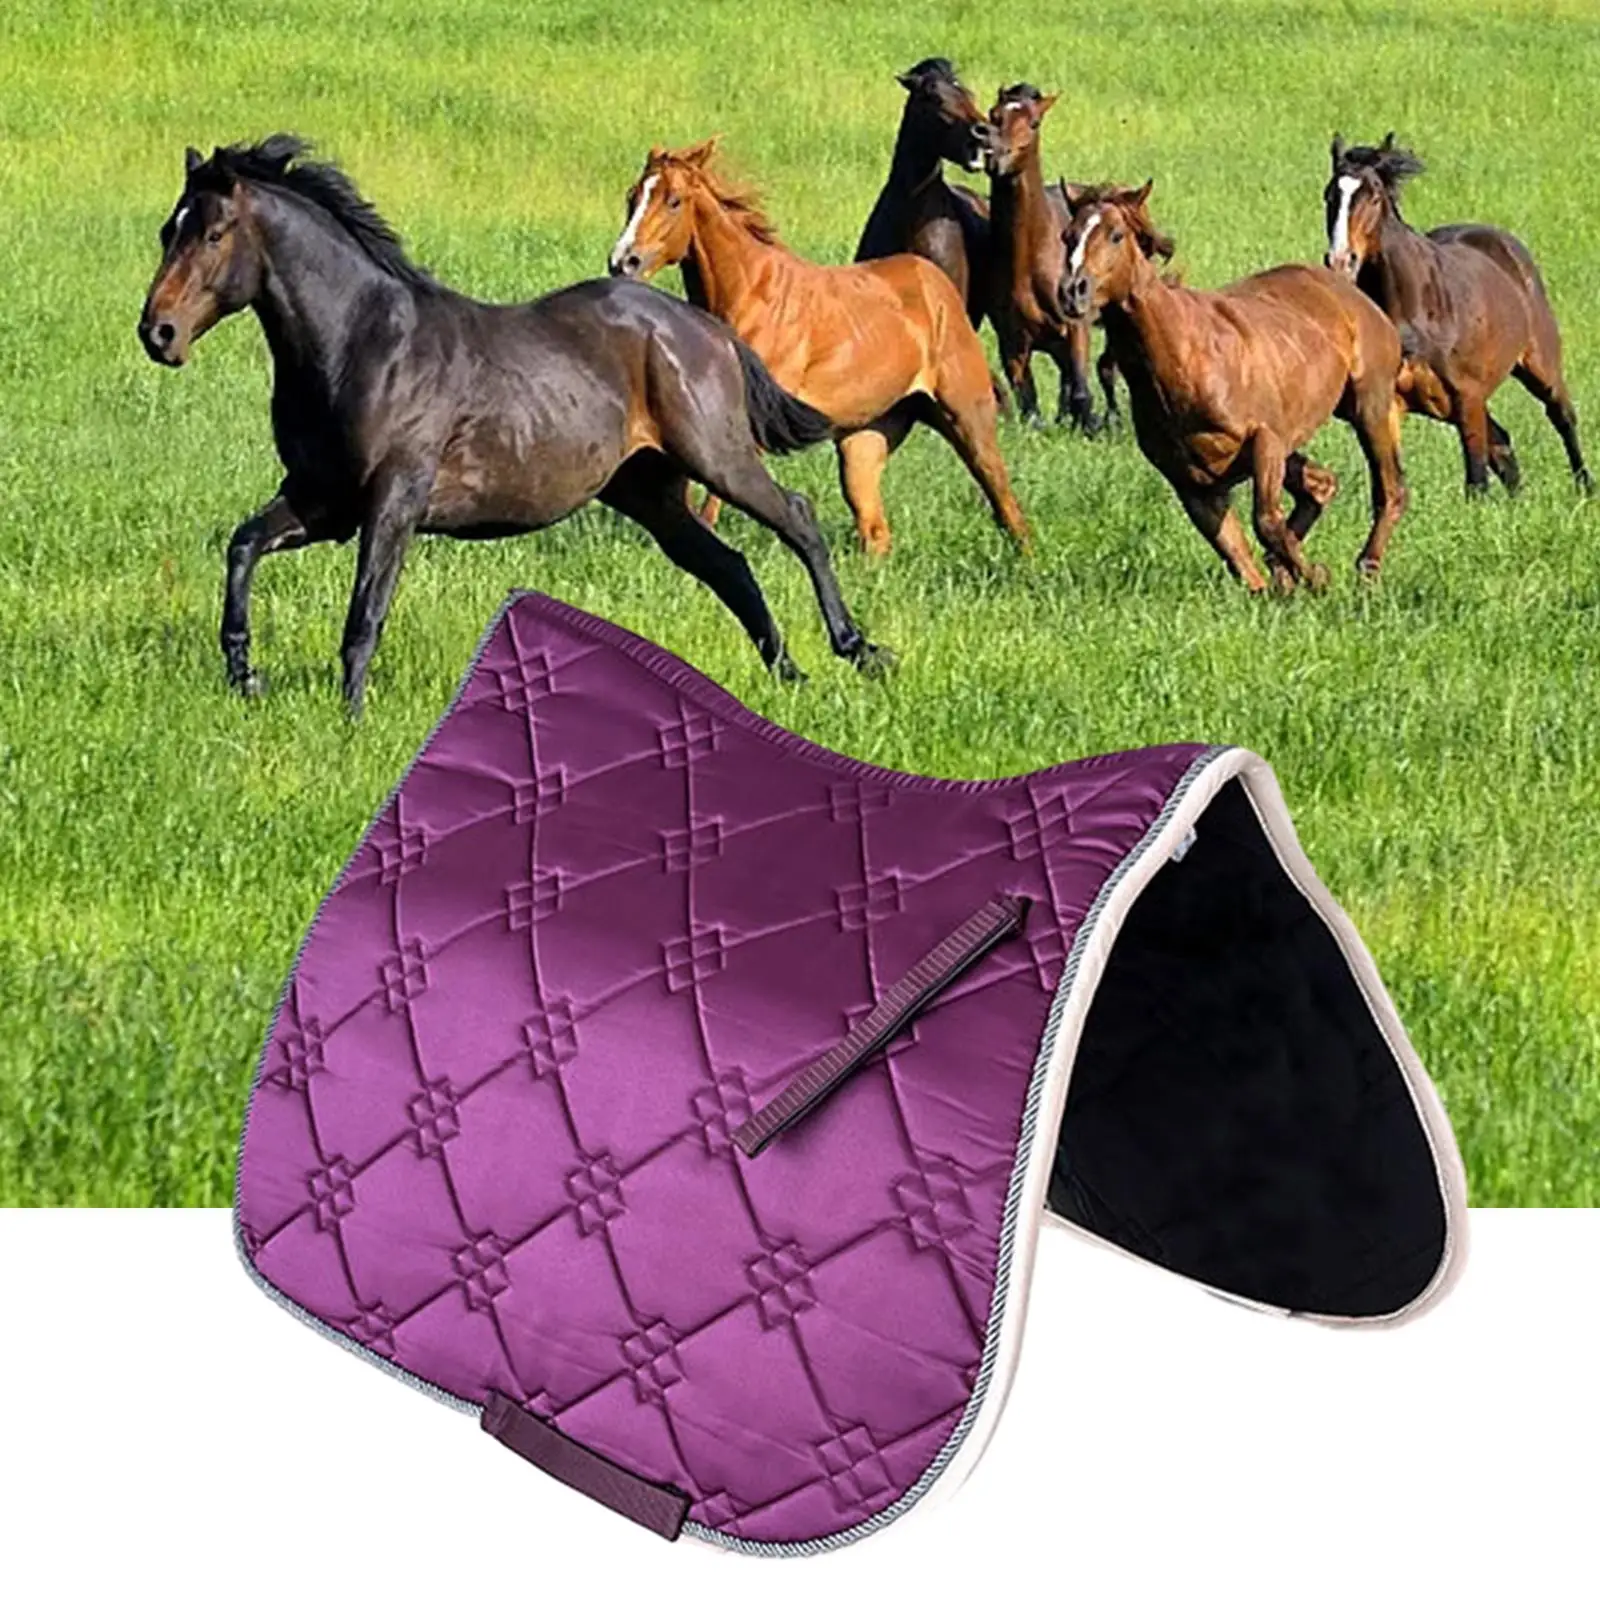 Saddle Pad Breathable Padding Portable Protector Lightweight Equestrian Riding